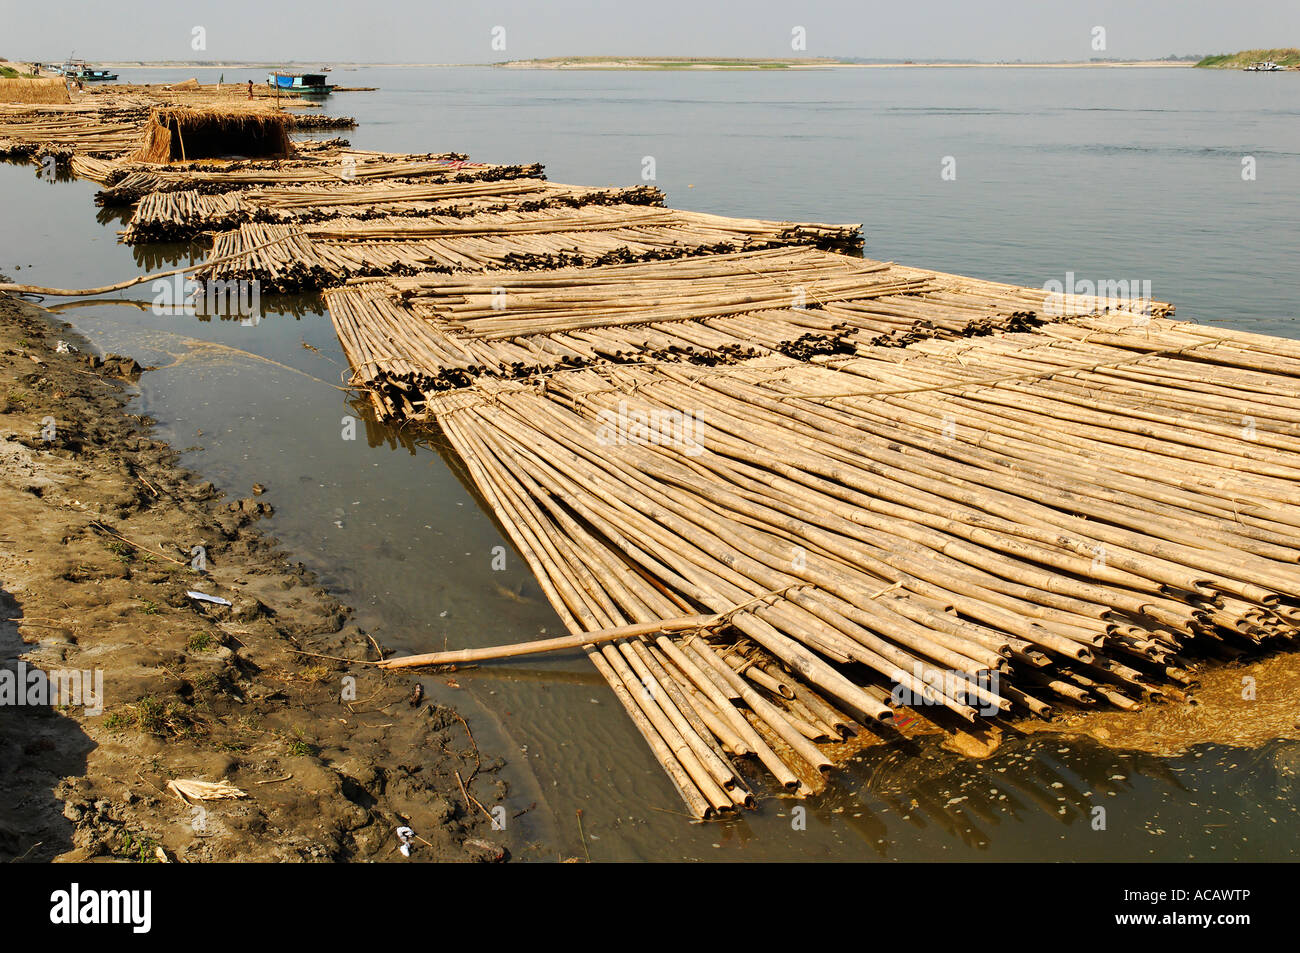 Bamboo float on the Irrawaddy river, Myanmar Stock Photo